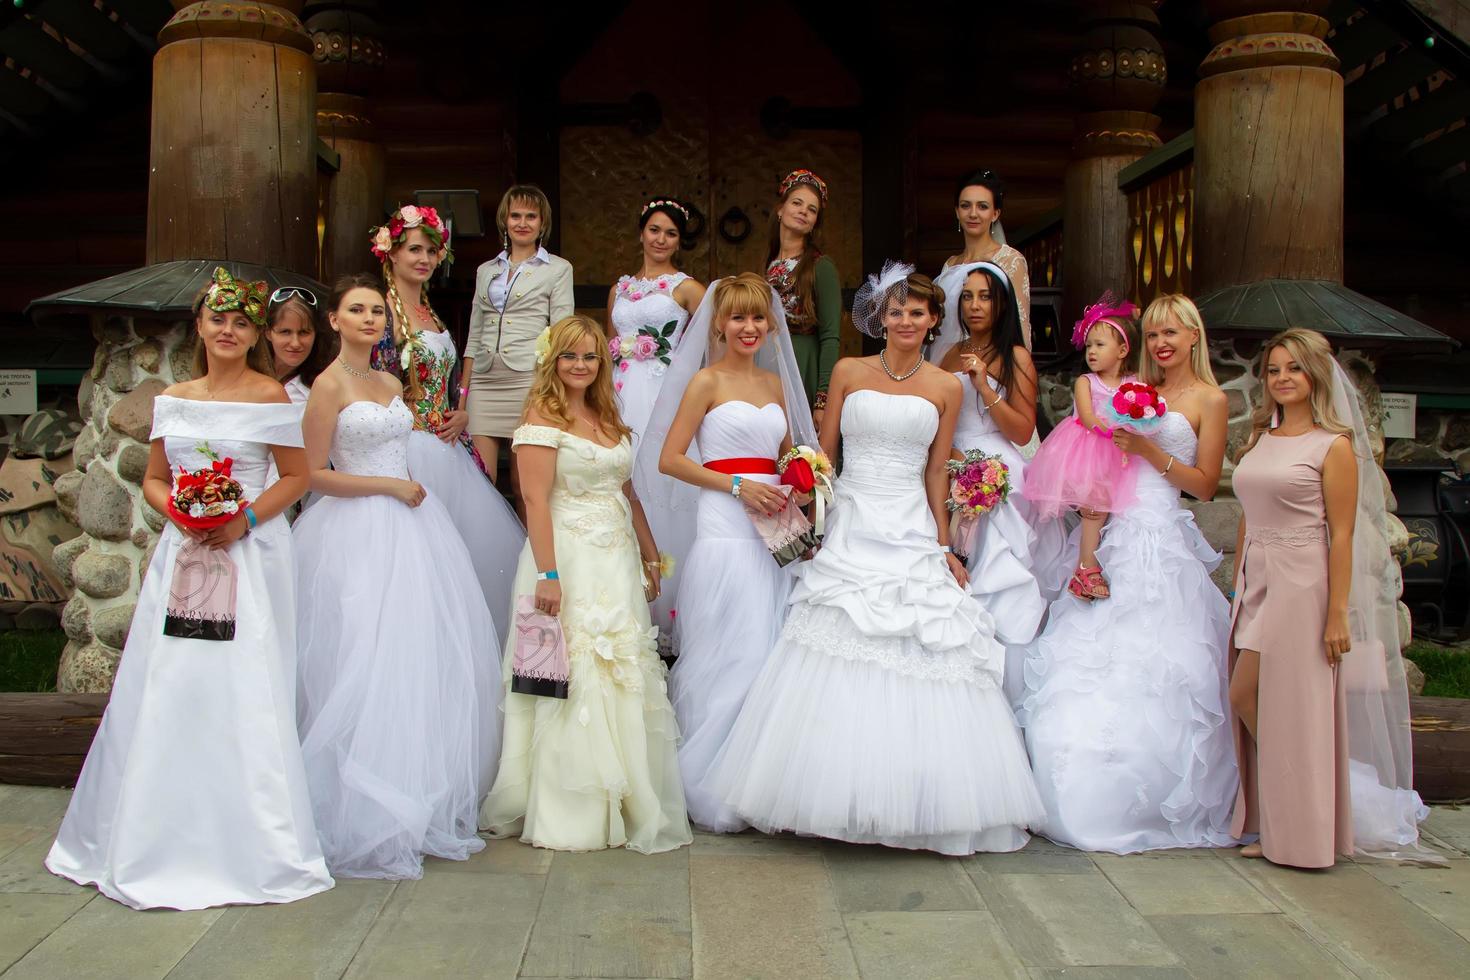 The parade of brides. A lot of women in wedding dresses. A group of brides. photo